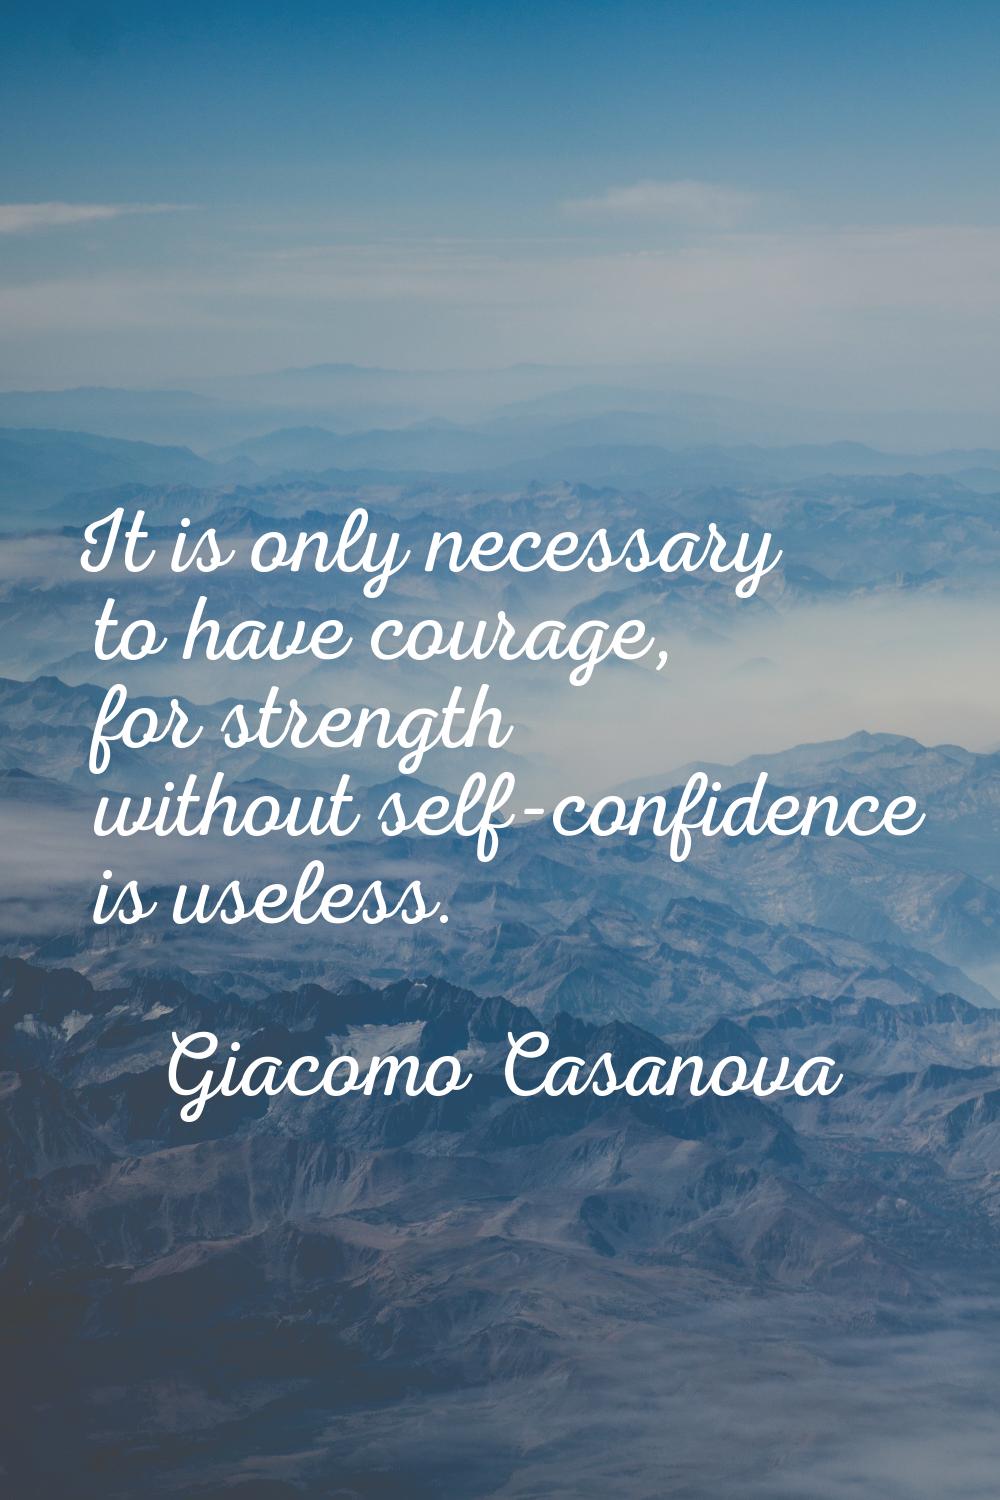 It is only necessary to have courage, for strength without self-confidence is useless.